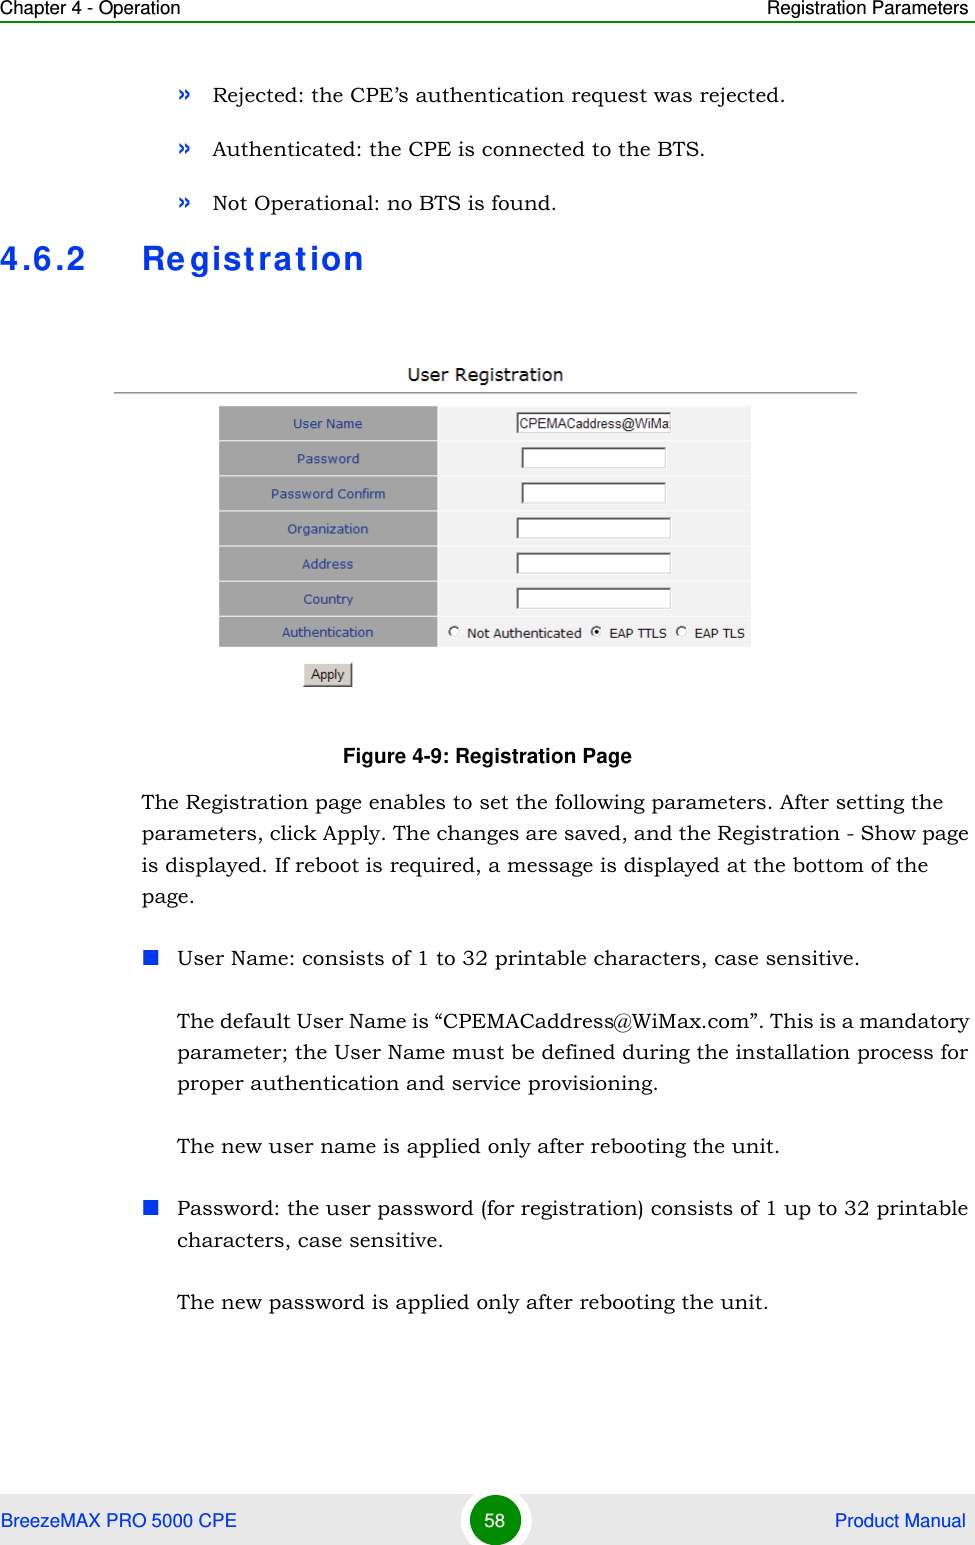 Chapter 4 - Operation Registration ParametersBreezeMAX PRO 5000 CPE 58  Product Manual»Rejected: the CPE’s authentication request was rejected.»Authenticated: the CPE is connected to the BTS.»Not Operational: no BTS is found.4.6.2 RegistrationThe Registration page enables to set the following parameters. After setting the parameters, click Apply. The changes are saved, and the Registration - Show page is displayed. If reboot is required, a message is displayed at the bottom of the page.User Name: consists of 1 to 32 printable characters, case sensitive.The default User Name is “CPEMACaddress@WiMax.com”. This is a mandatory parameter; the User Name must be defined during the installation process for proper authentication and service provisioning.The new user name is applied only after rebooting the unit.Password: the user password (for registration) consists of 1 up to 32 printable characters, case sensitive.The new password is applied only after rebooting the unit.Figure 4-9: Registration Page